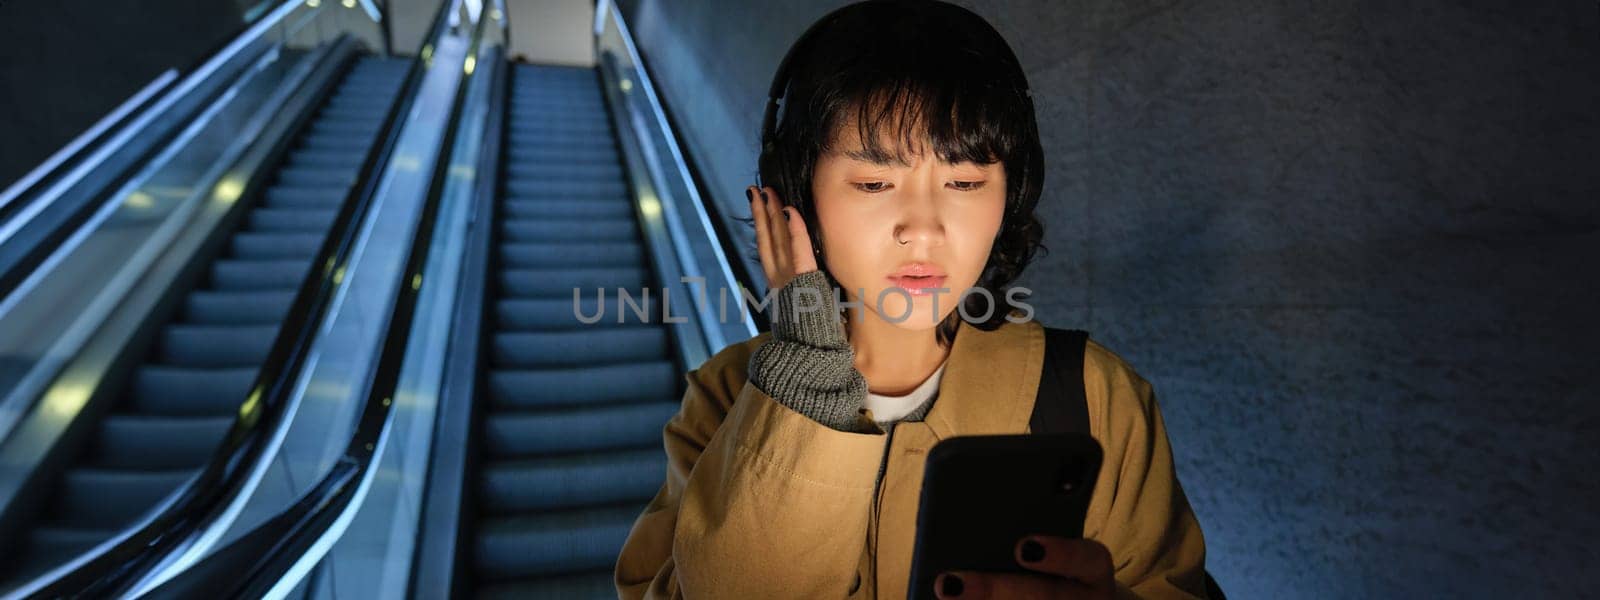 Woman in headphones, listens music, looks concerned at her phone screen, goes down escalator in city.